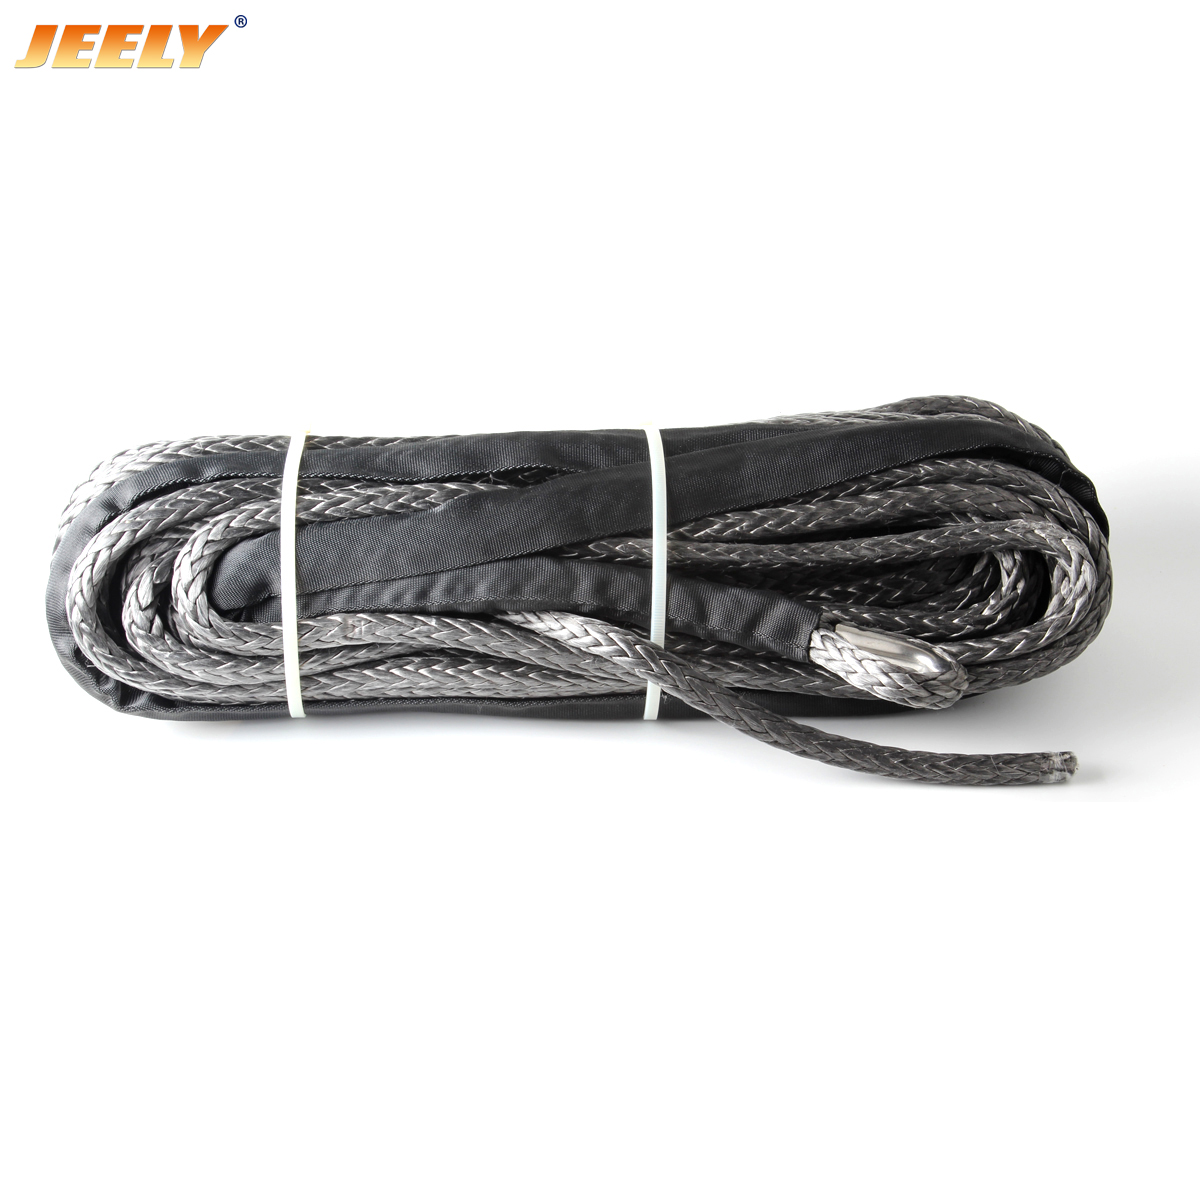 15mm spectra synthetic winch rope